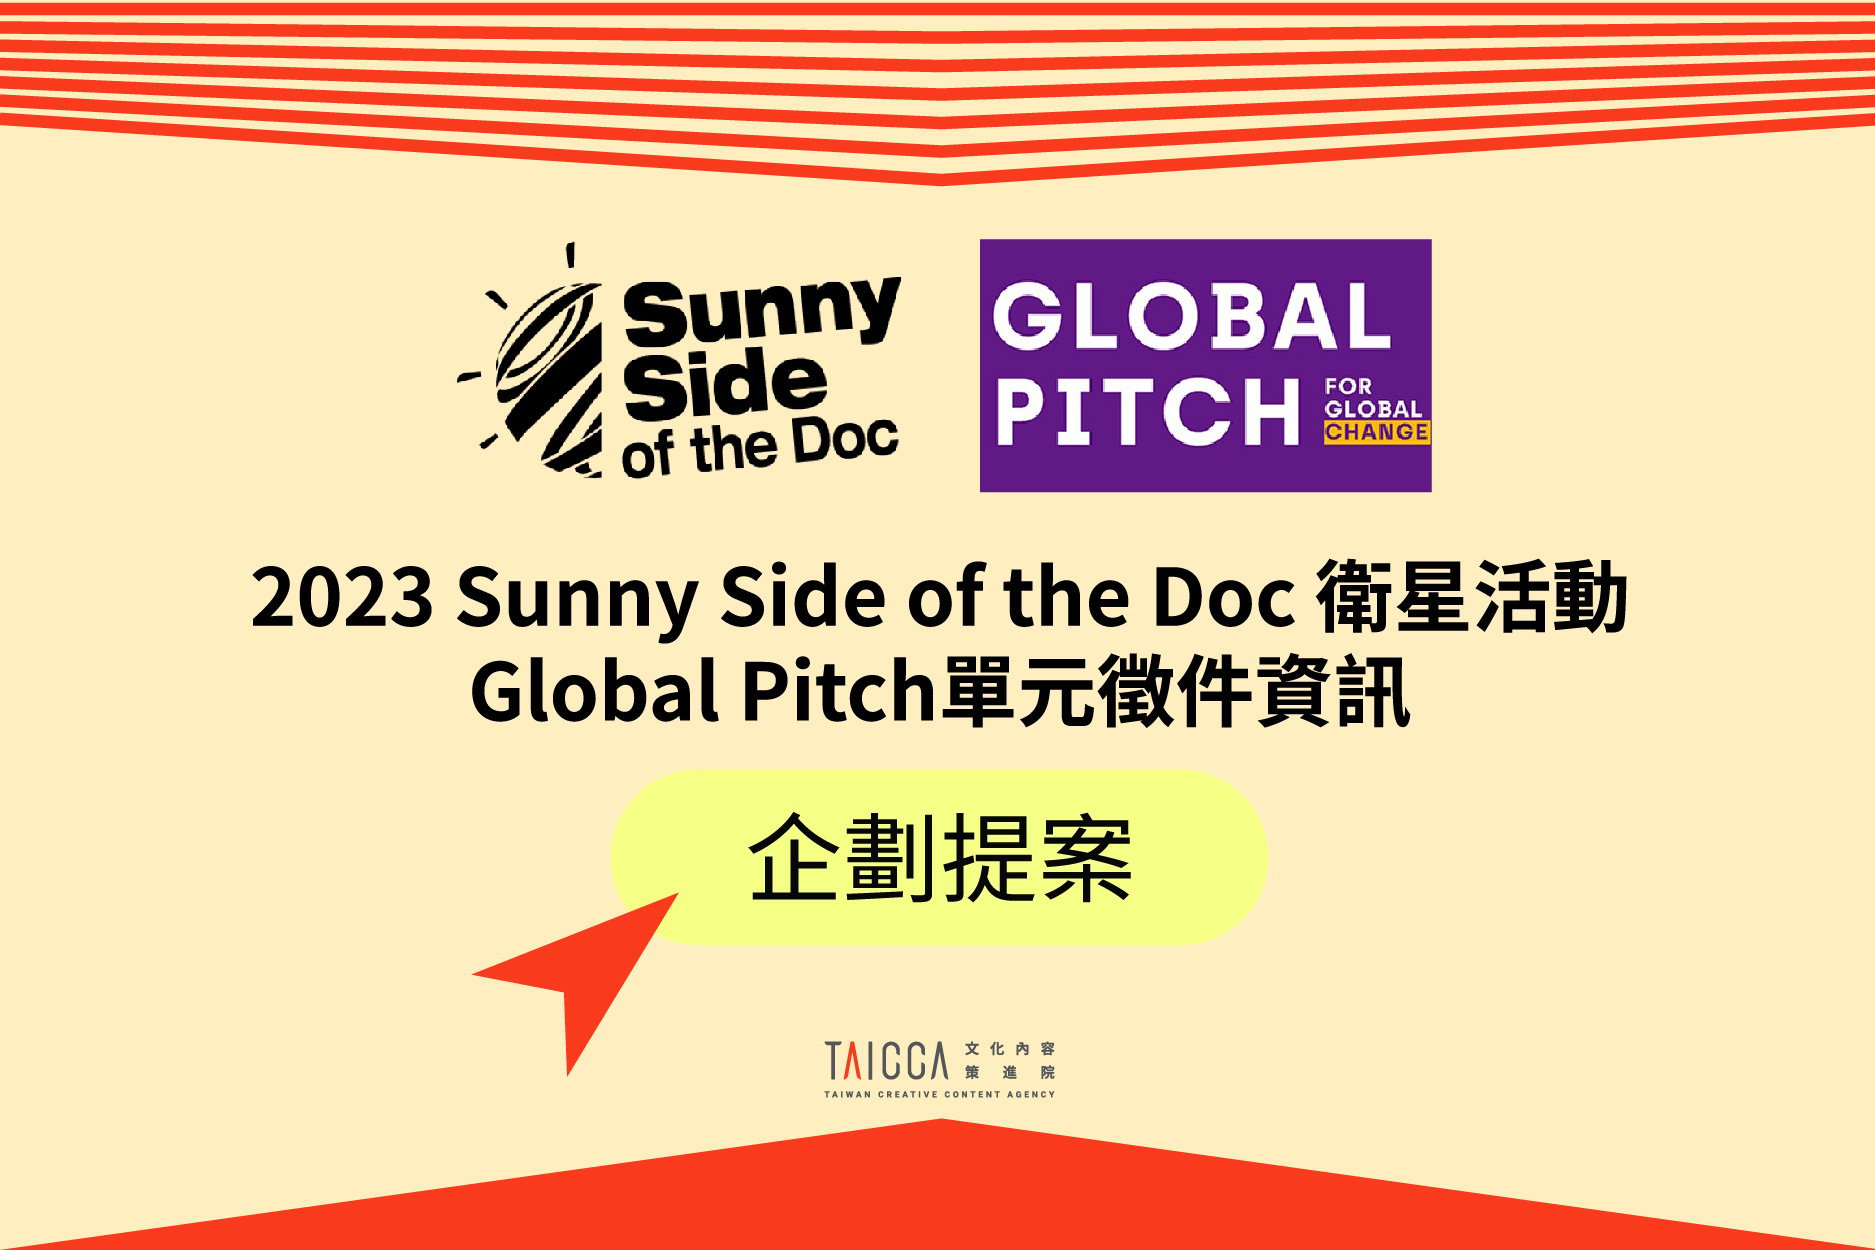 2023「Sunny Side of the Doc」衛星活動「Global Pitch」單元徵件資訊